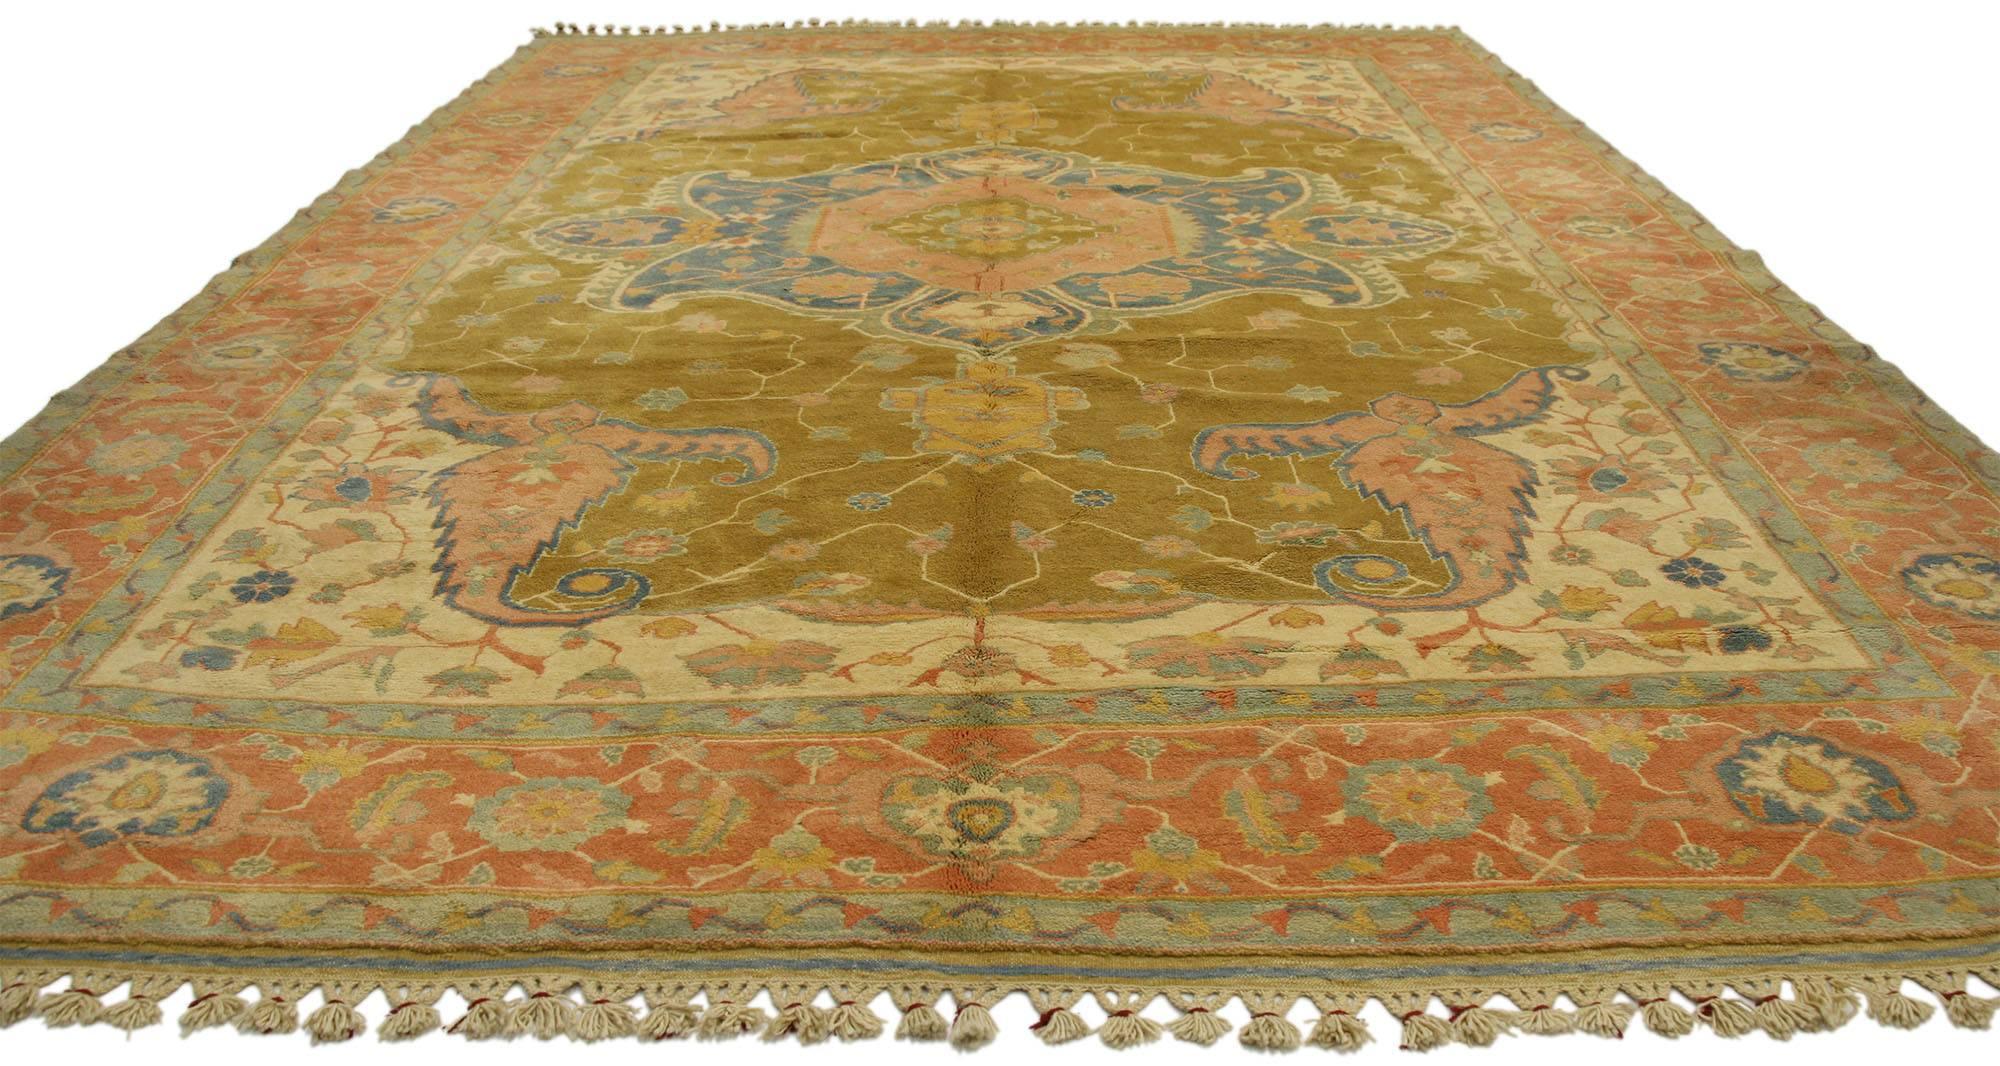 77127 Vintage Turkish Oushak Rug with Georgian Country Cottage Style 08'08 x 12'06. Go beyond feminine and into the realm of chic with this spring color vintage Turkish Oushak rug. This hand-knotted wool vintage Oushak rug features a center